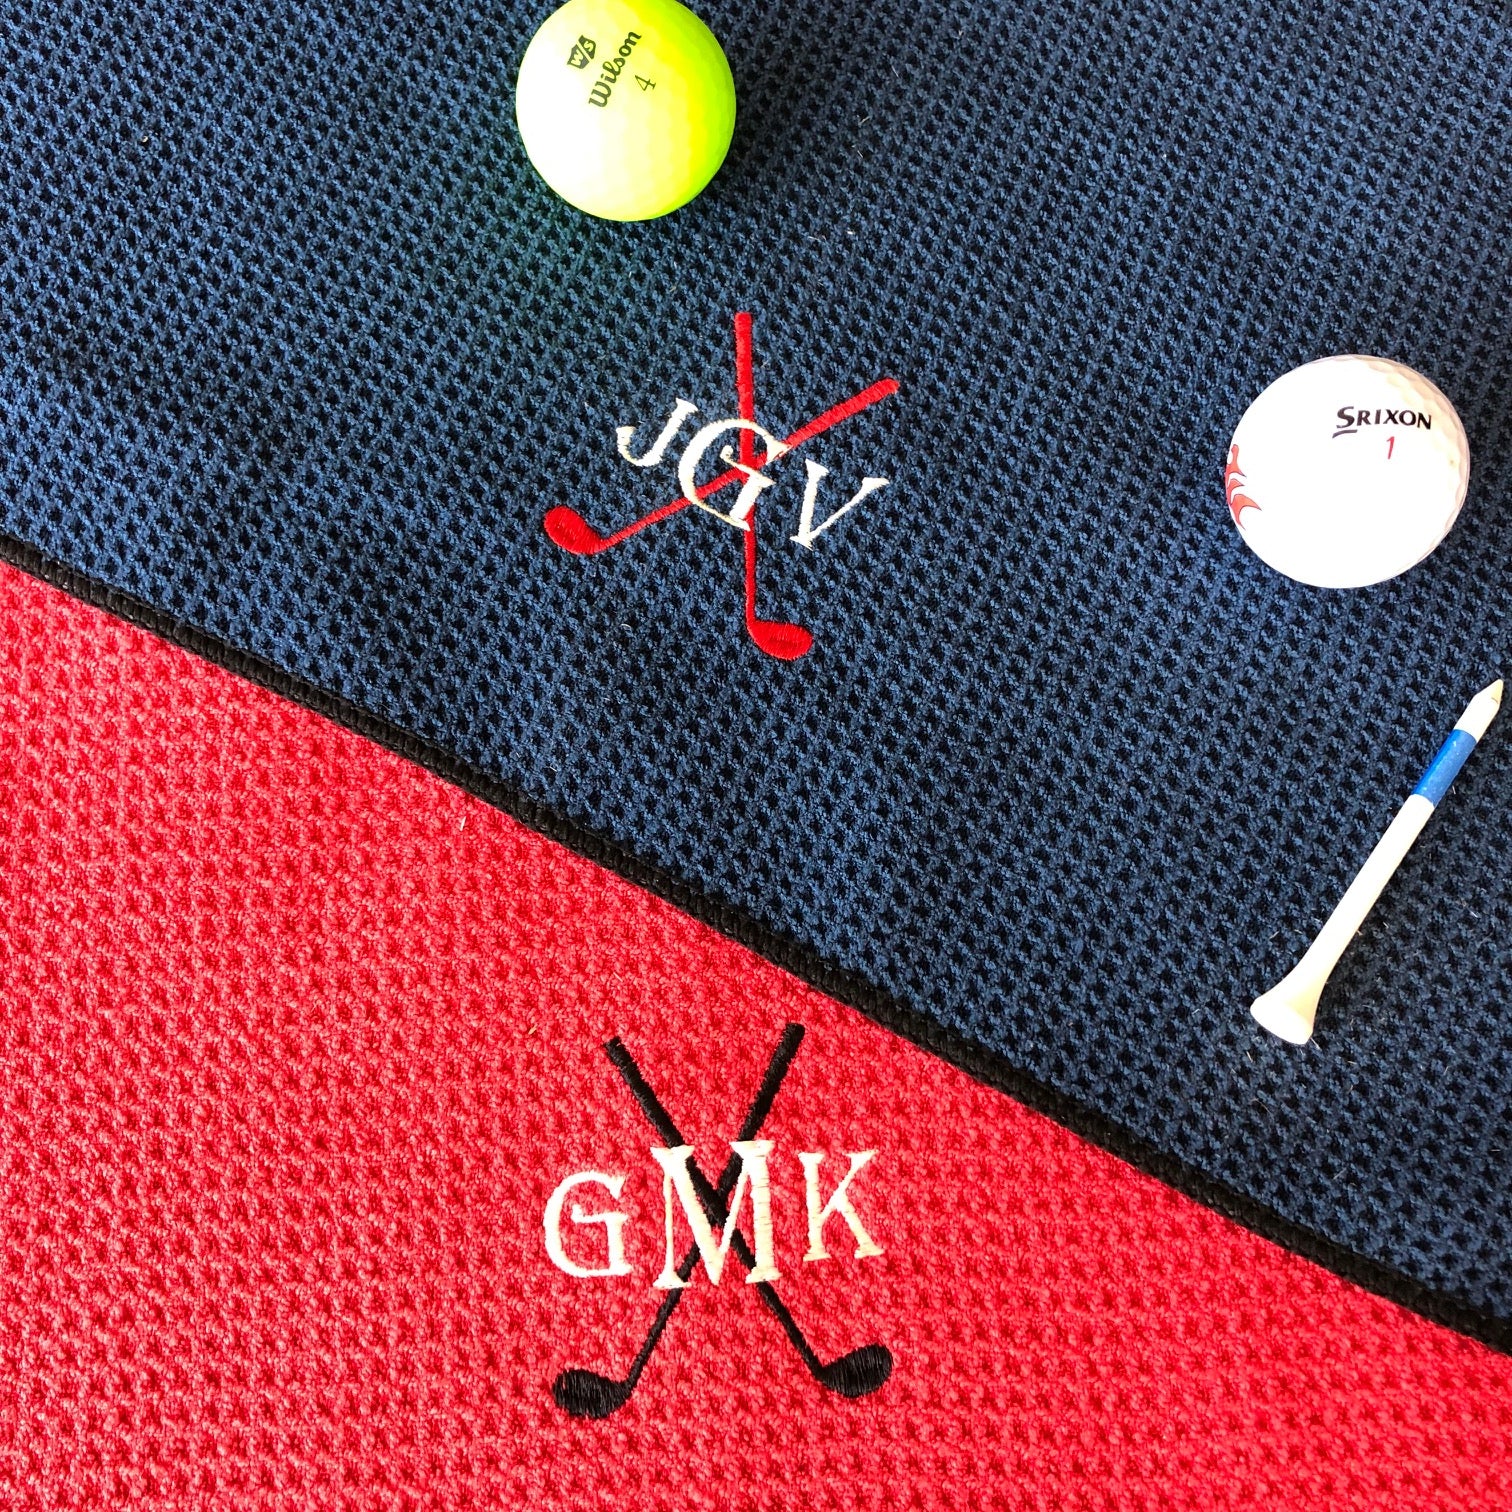  Personalized Custom Golf Towel - Add Your Embroidered Name or  Monogram - Trifold Golf Towels with Center Loop and Carabiner Clip, Hook :  Sports & Outdoors